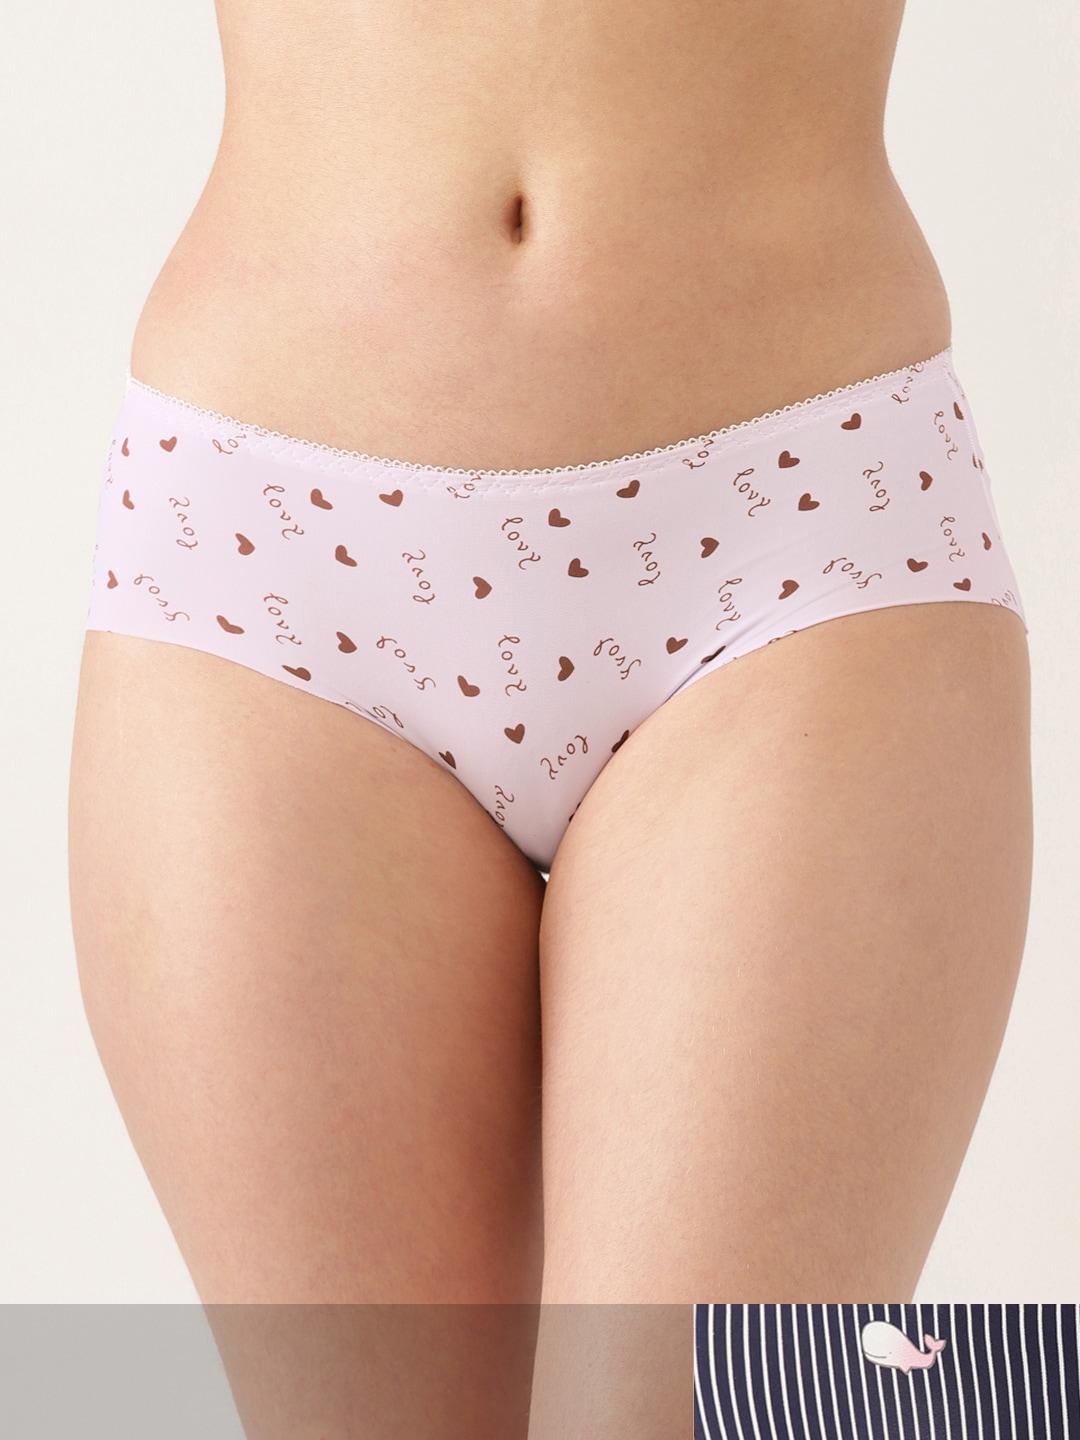 ms.lingies women pack of 2 printed hipster briefs msp101s